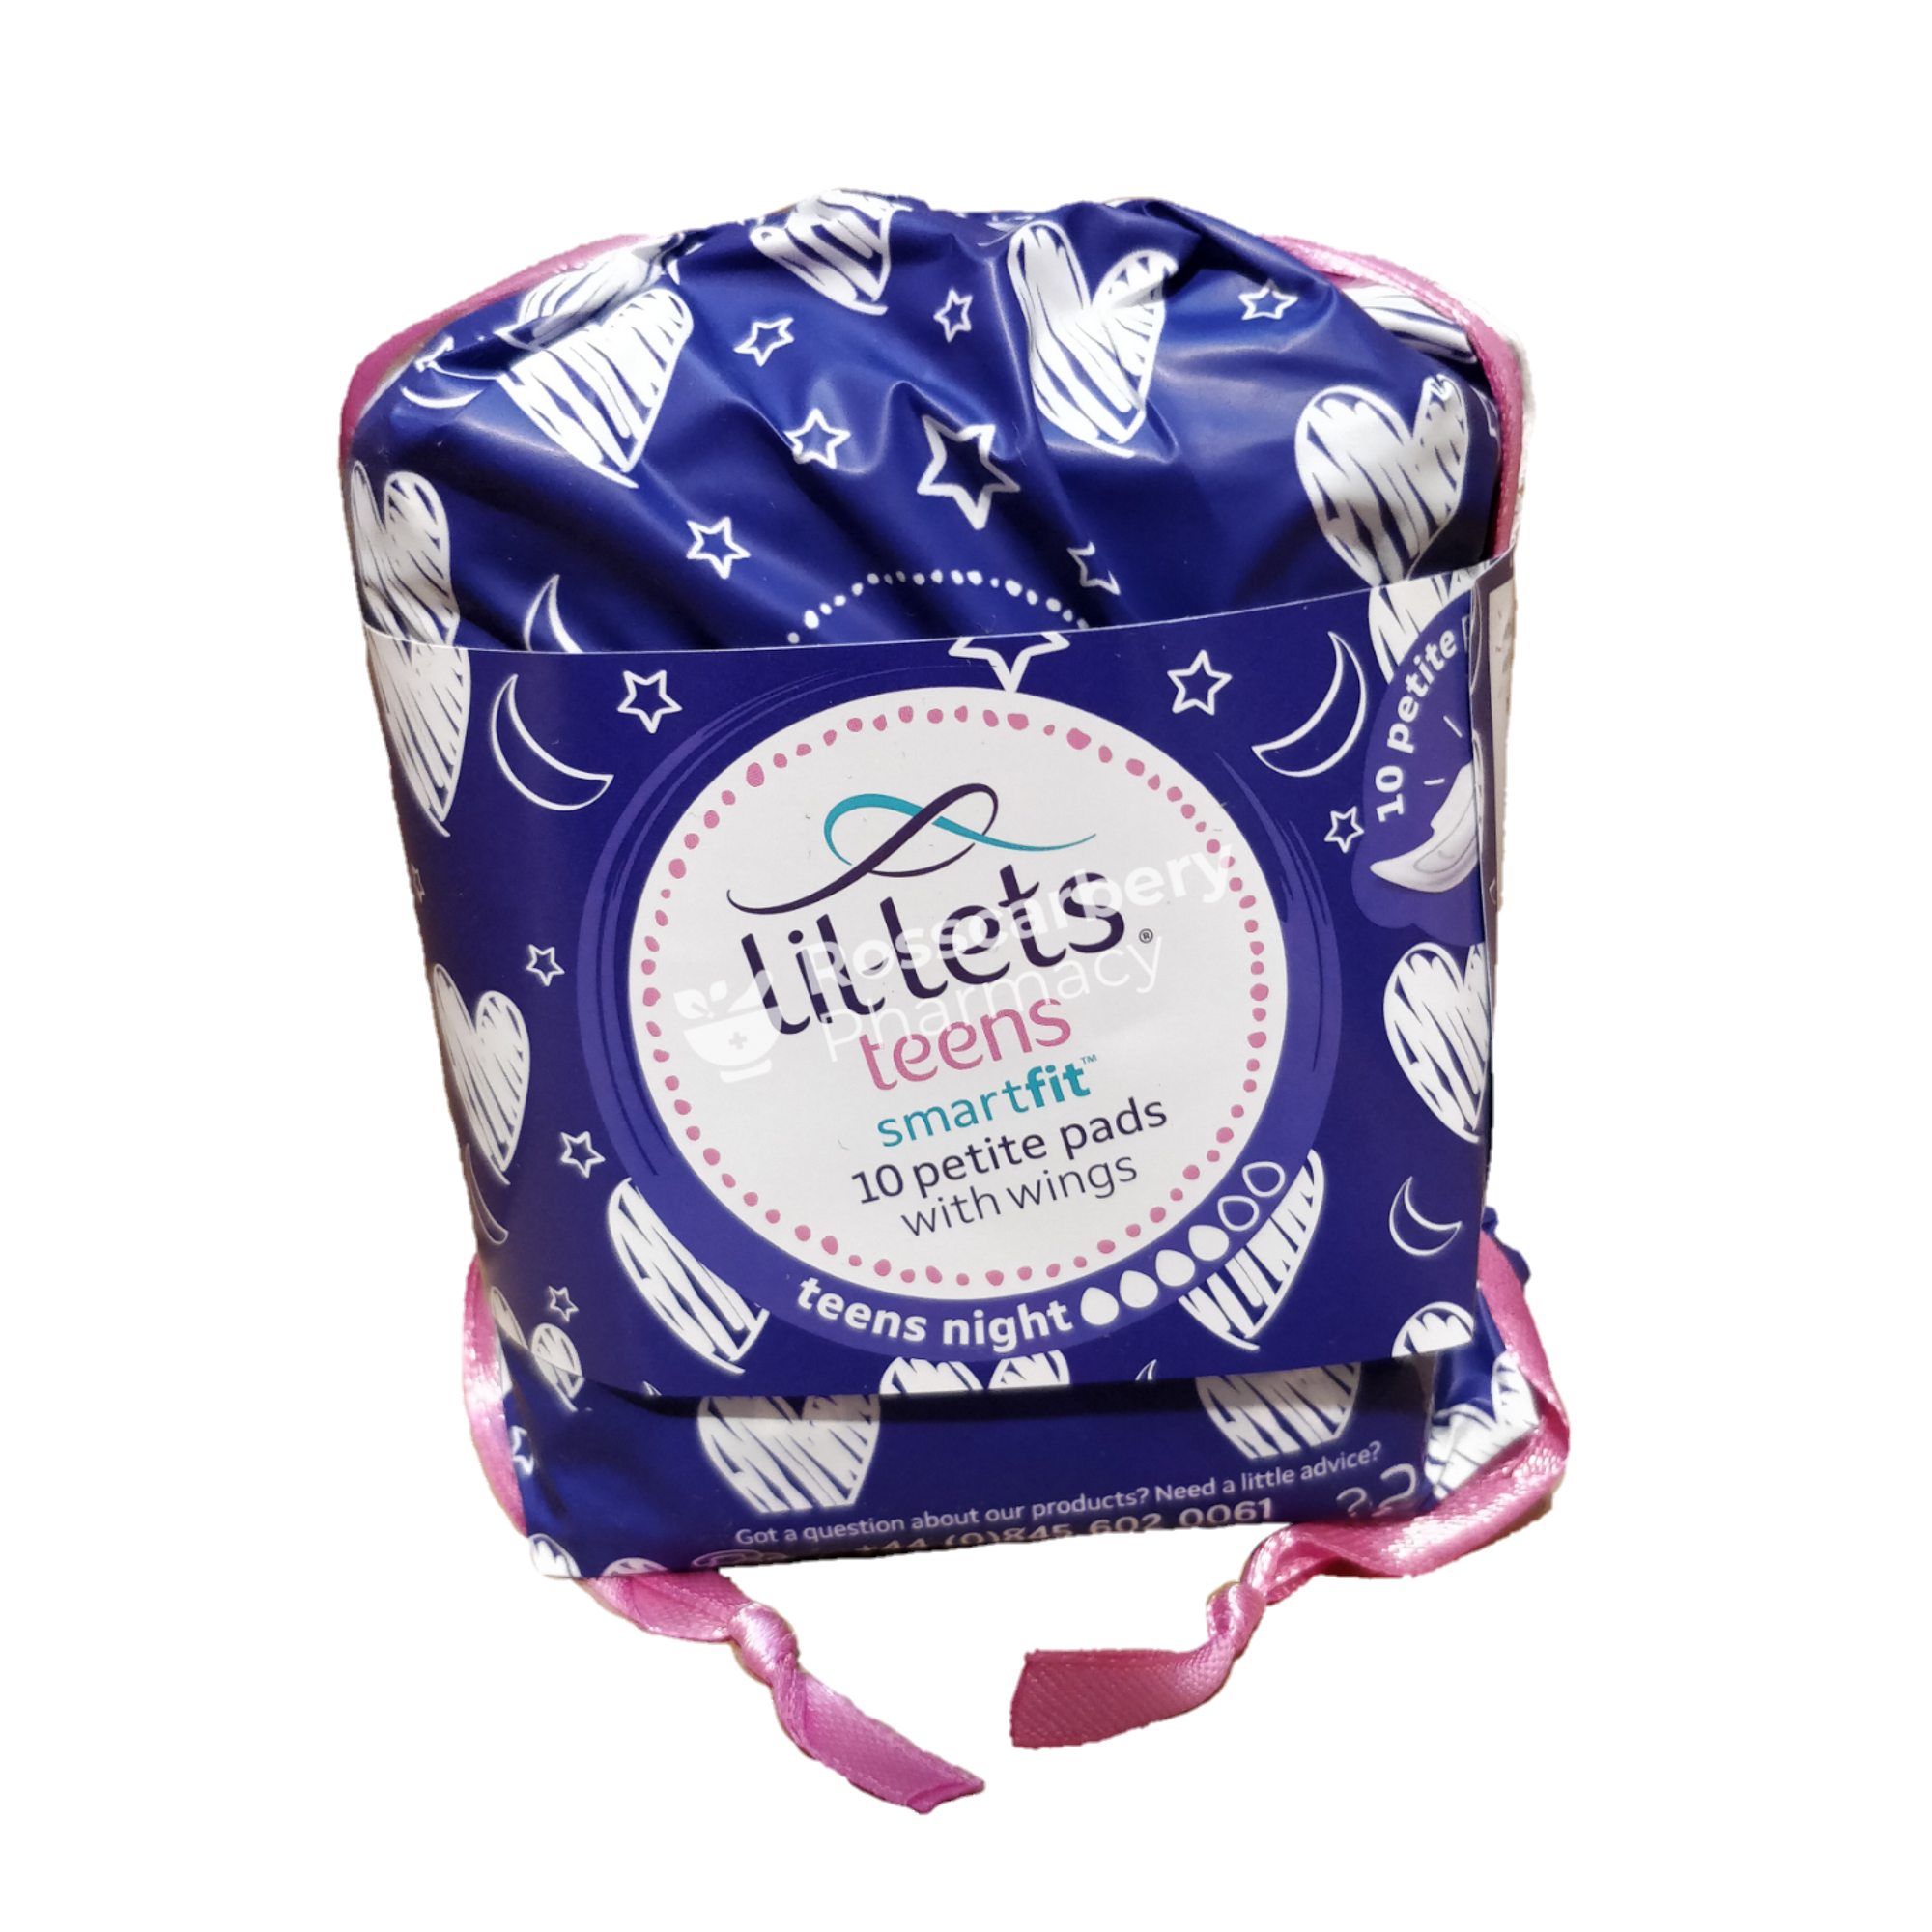 Lil-Lets Teens Smart Fit Petite Pads With Wings 10 Pads & Liners